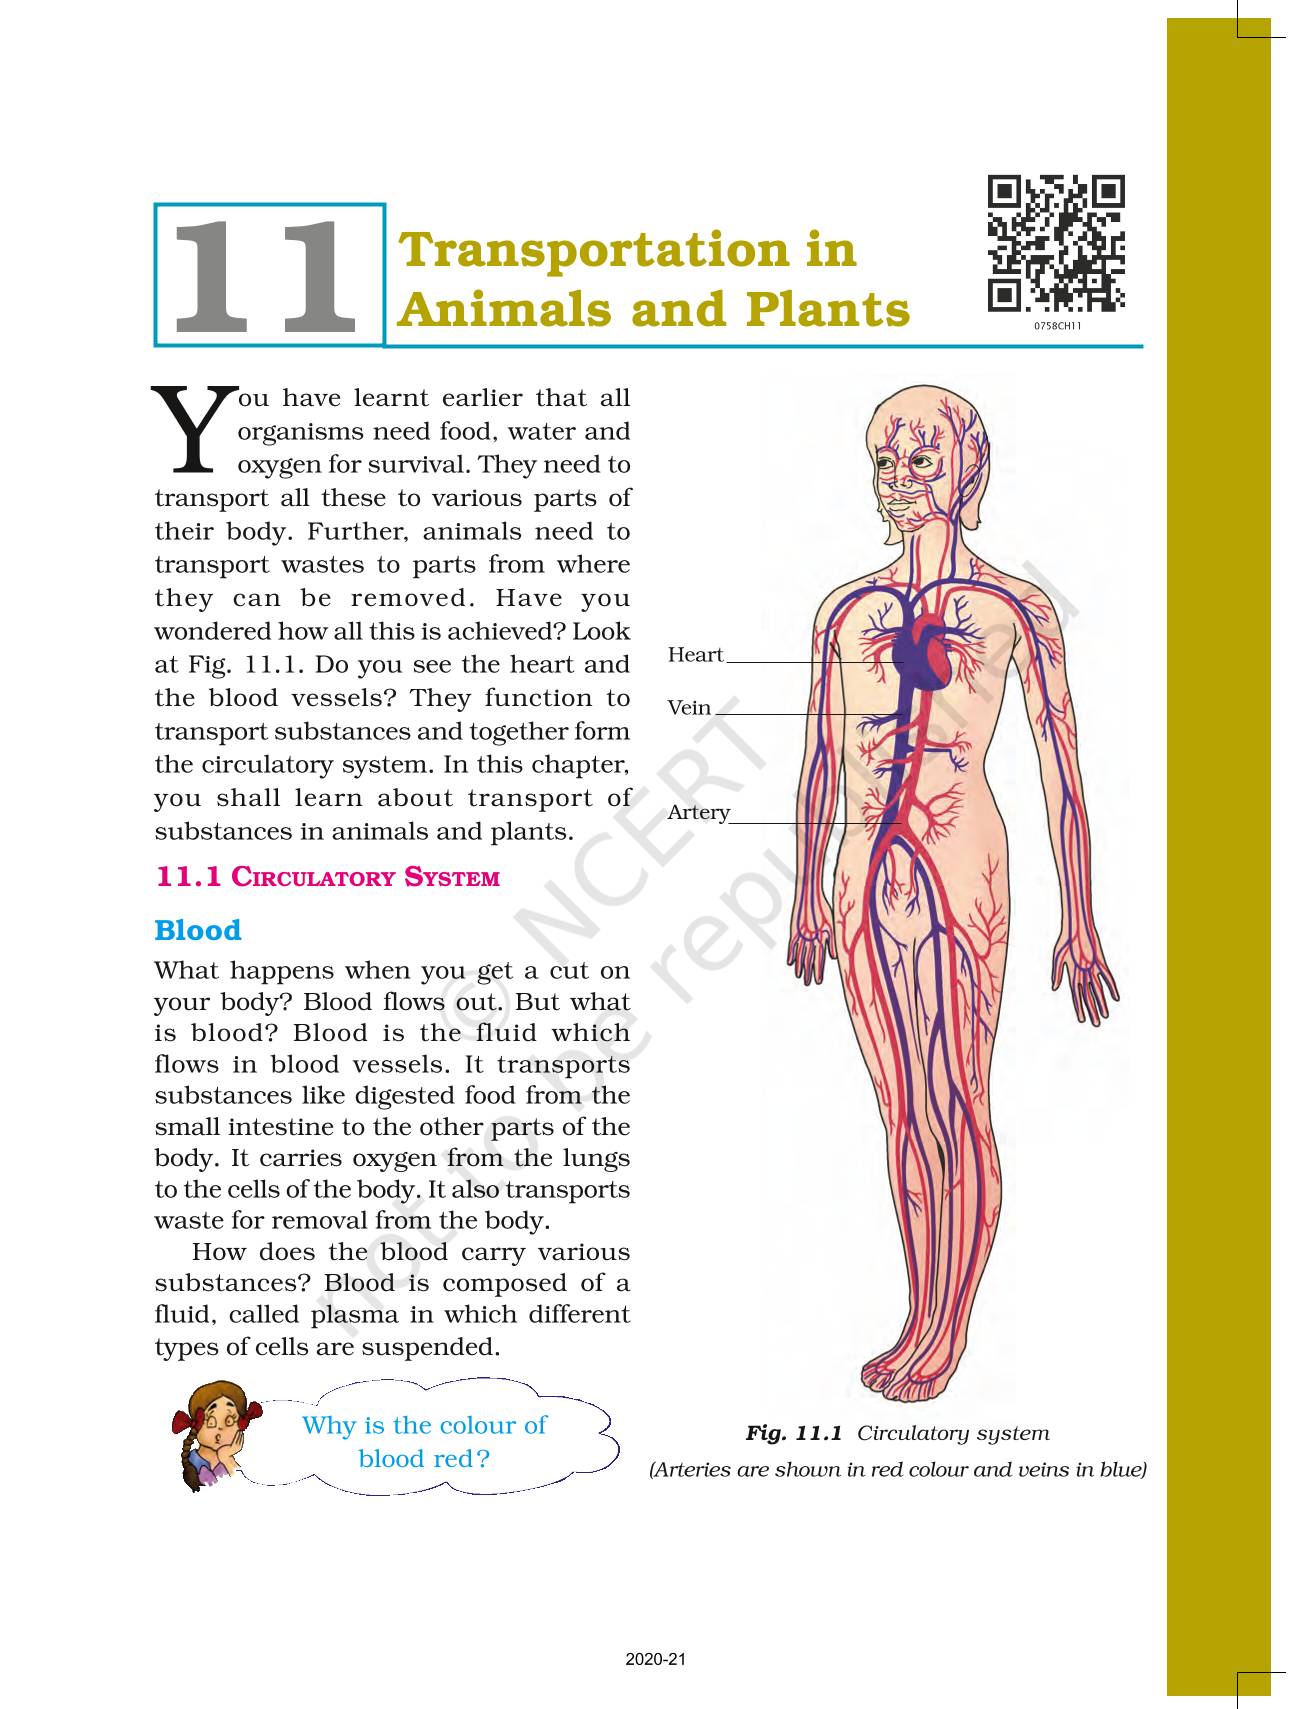 Transportation In Aminals And Plants - NCERT Book of Class 7 Science